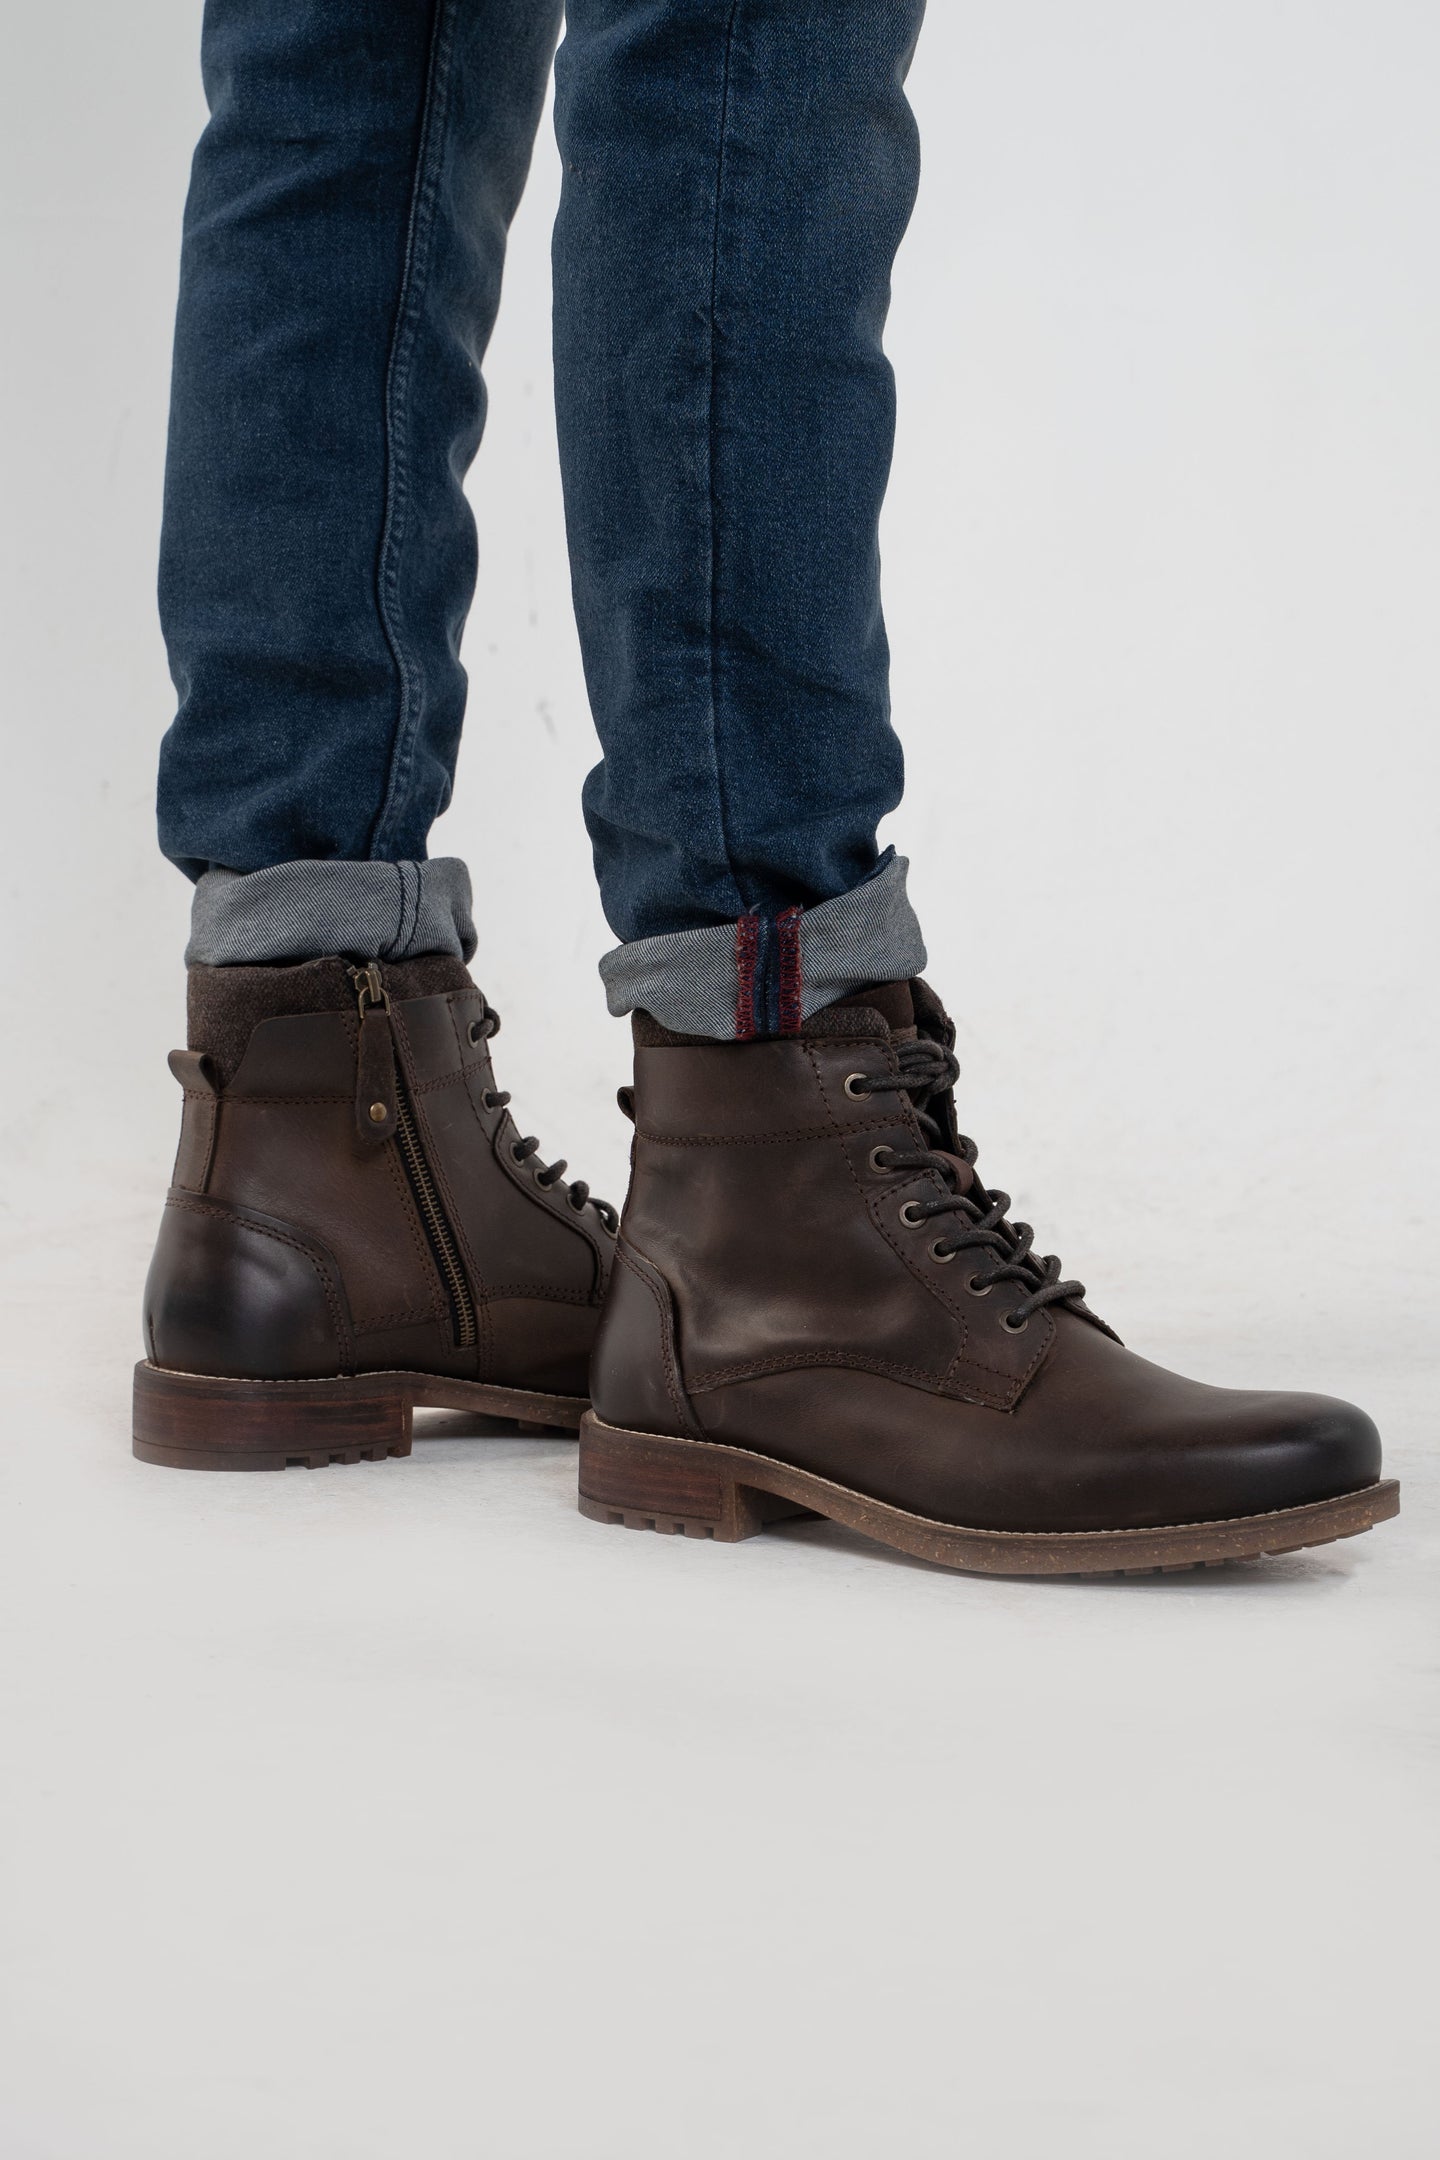 Roamers Brown Leather Boots 7